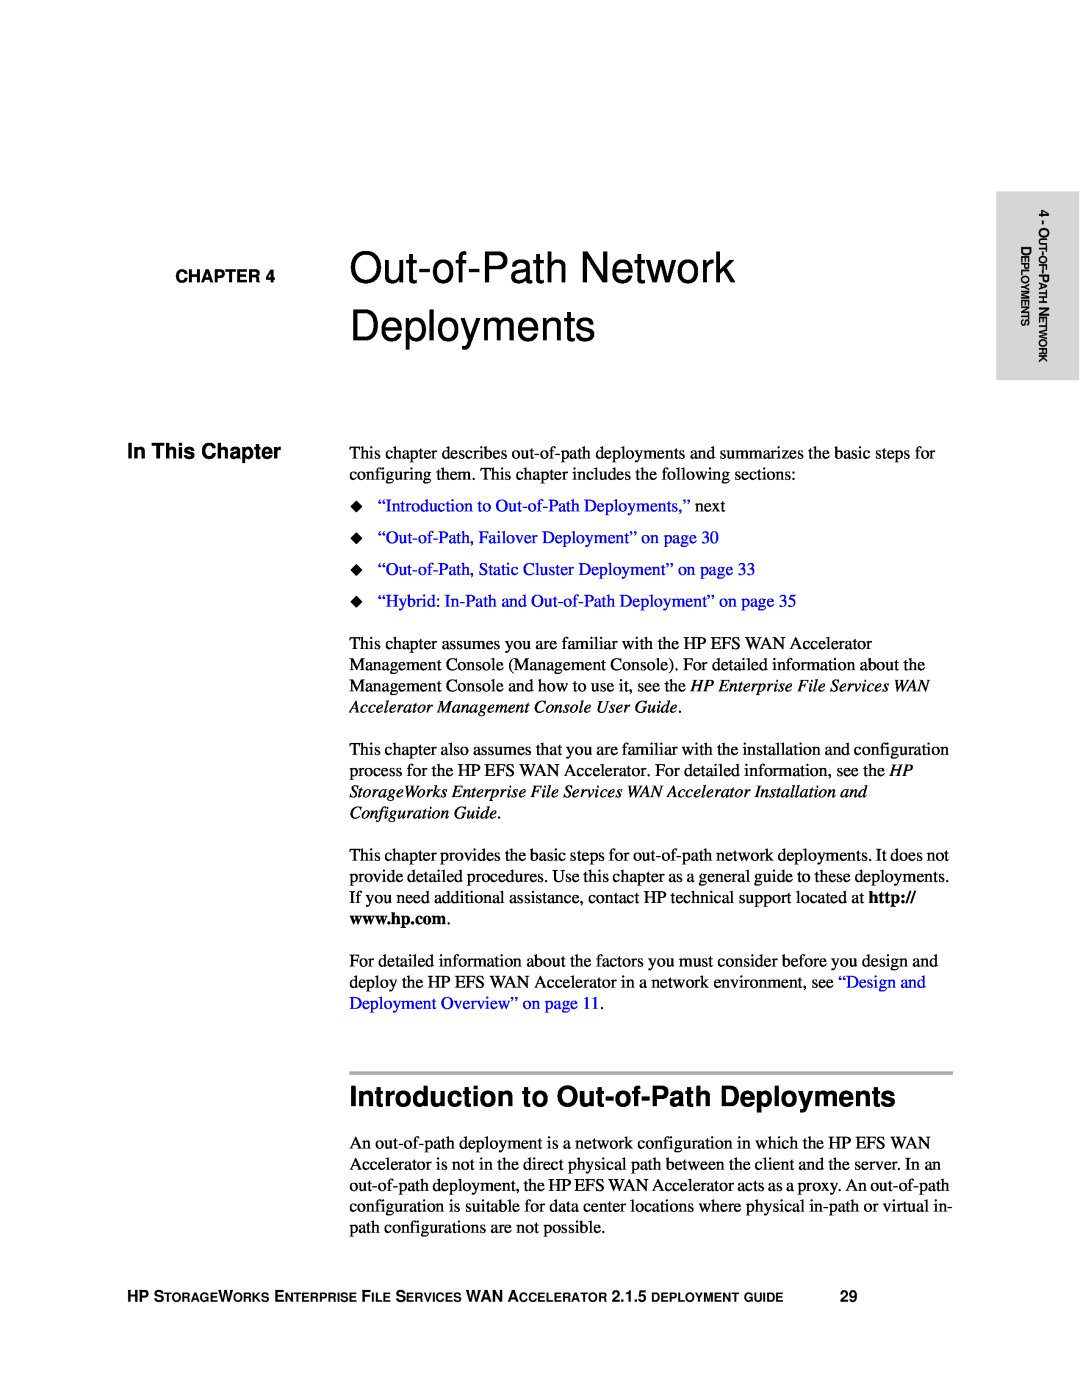 HP Enterprise File Services WAN Accelerator manual Out-of-Path Network Deployments, Introduction to Out-of-Path Deployments 